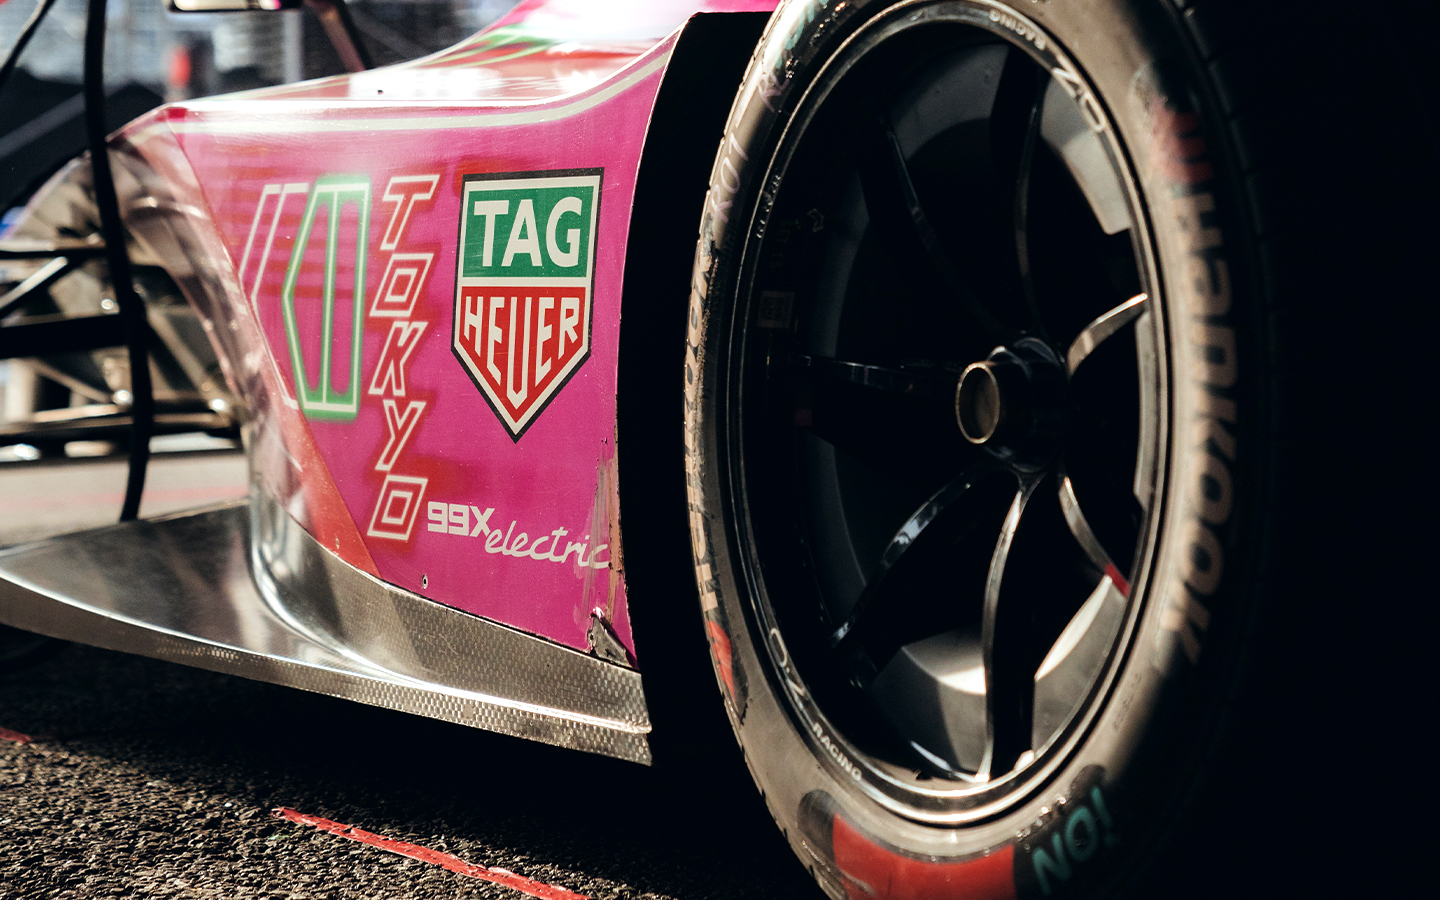 Close-up of TAG Heuer Porsche 99X Electric rear wheel